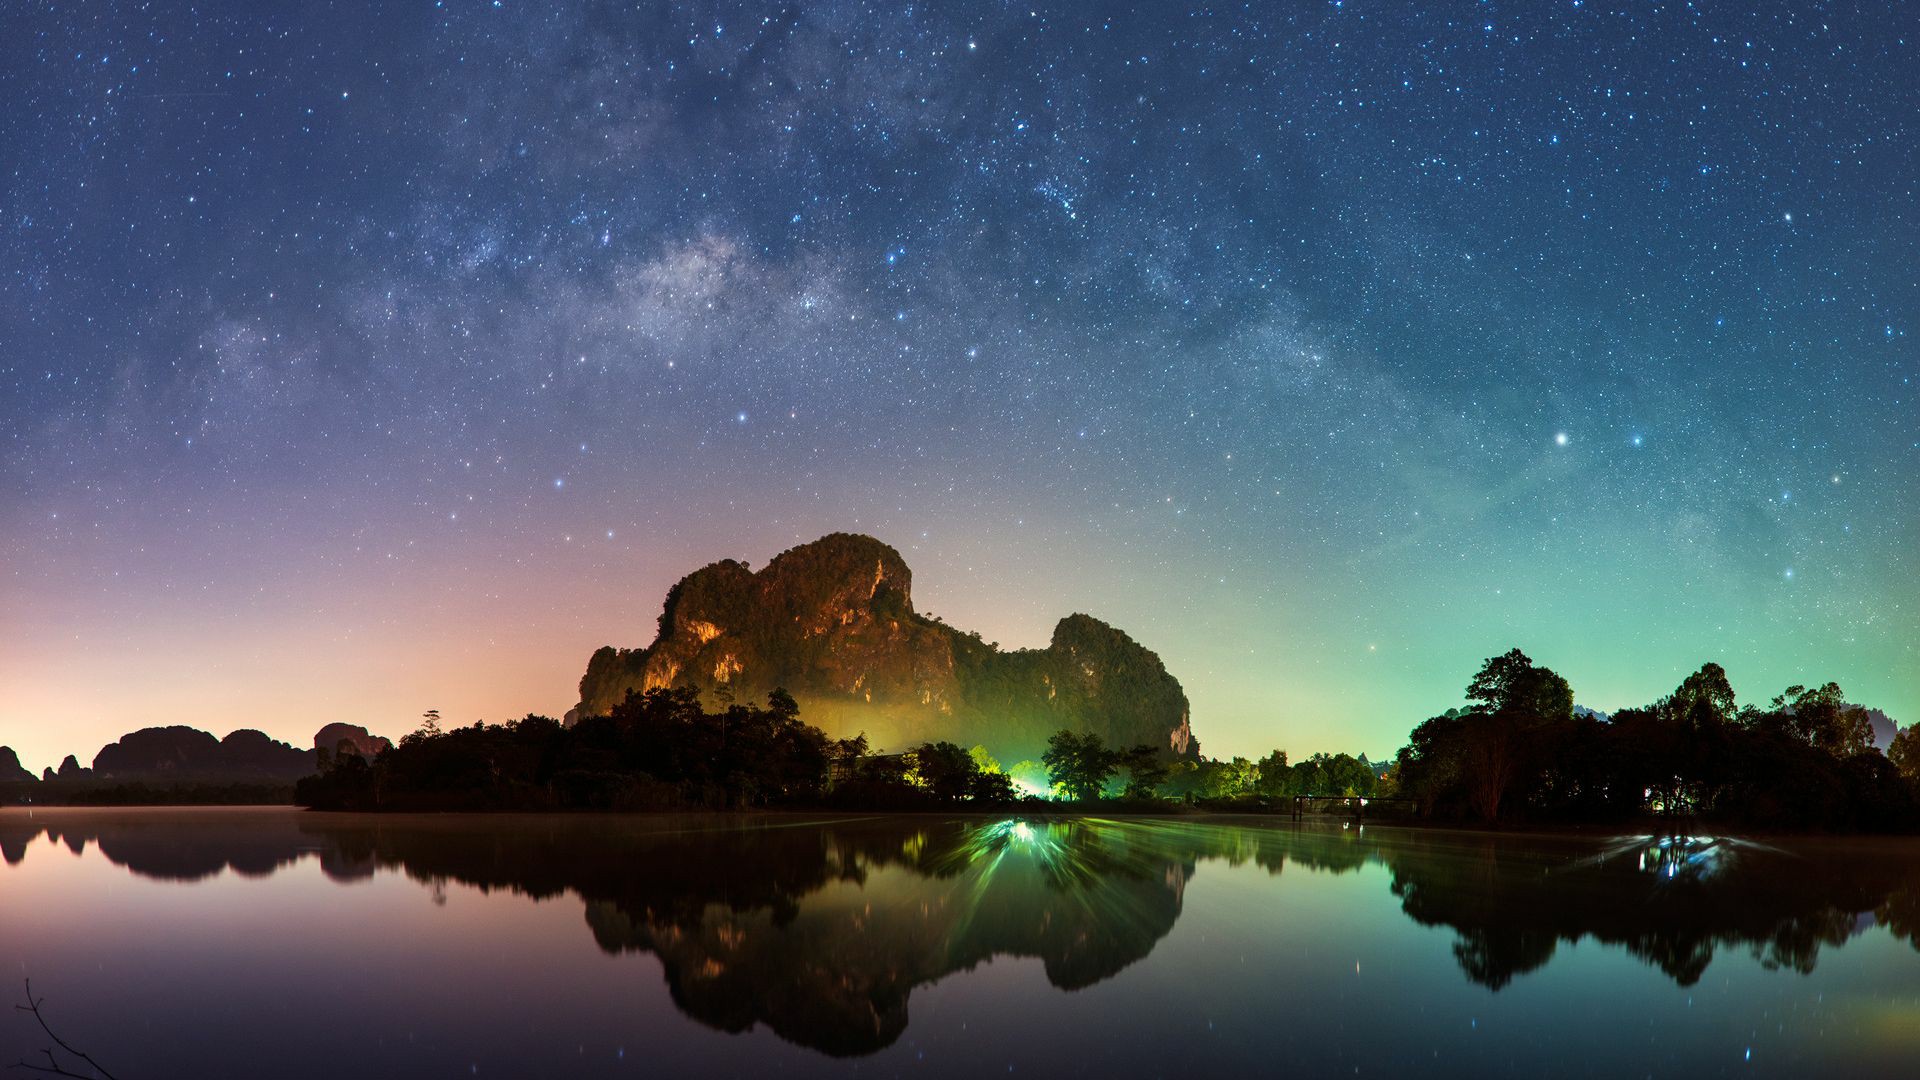 General 1920x1080 starred sky landscape nature lake sky clouds reflection night